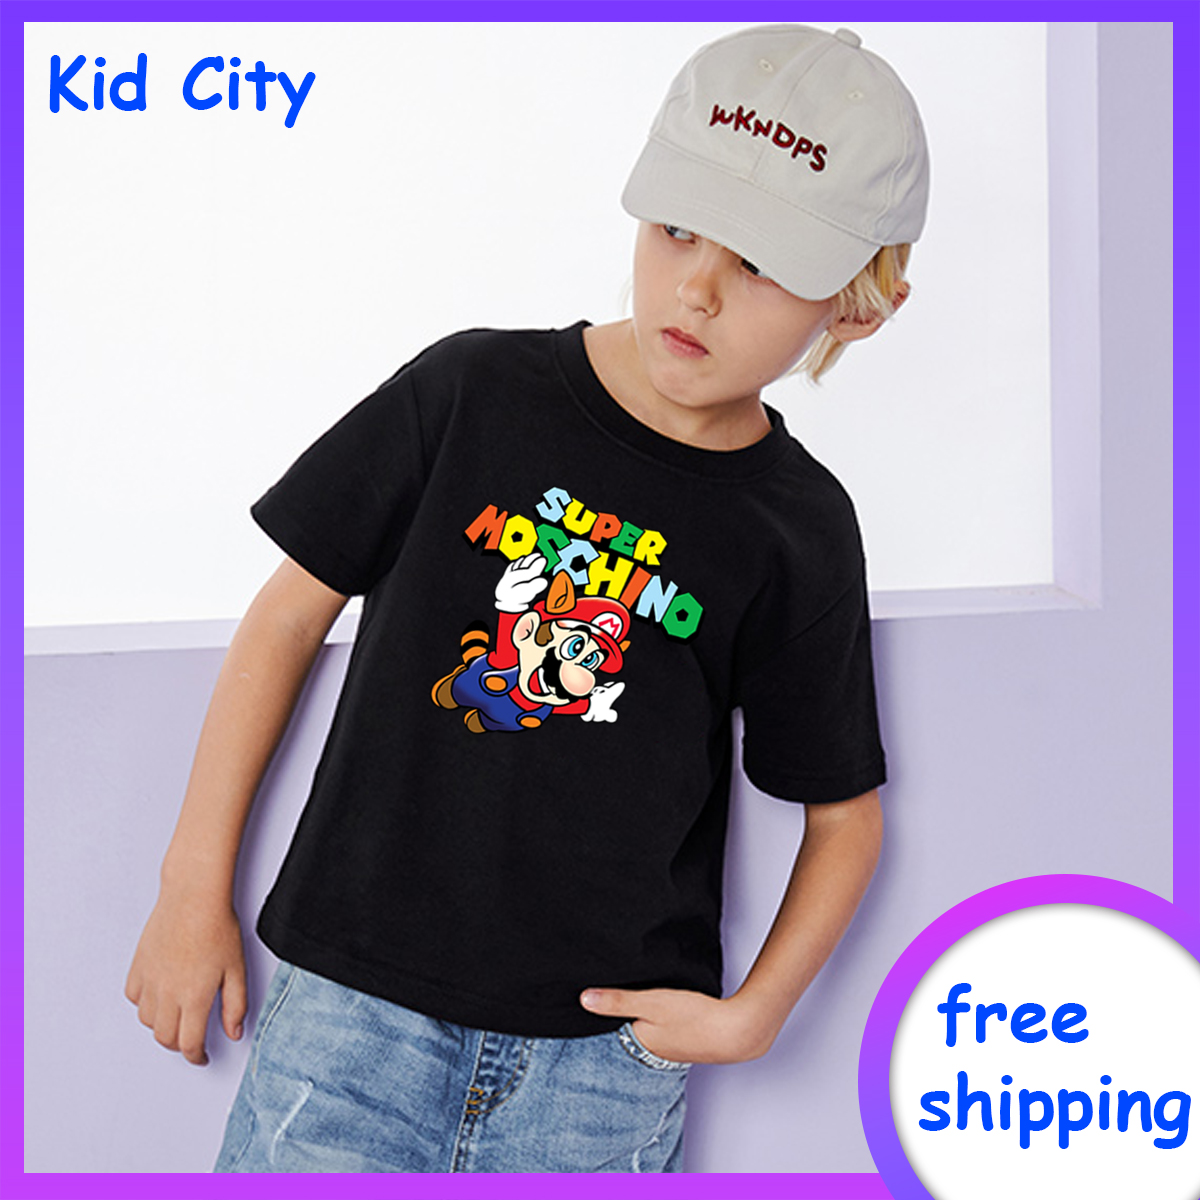 Boys Shirts For Sale T Shirts For Boys Online For Sale With Great Prices Deals Lazada Com Ph - galaxy adidas t shirt roblox off 71 free shipping